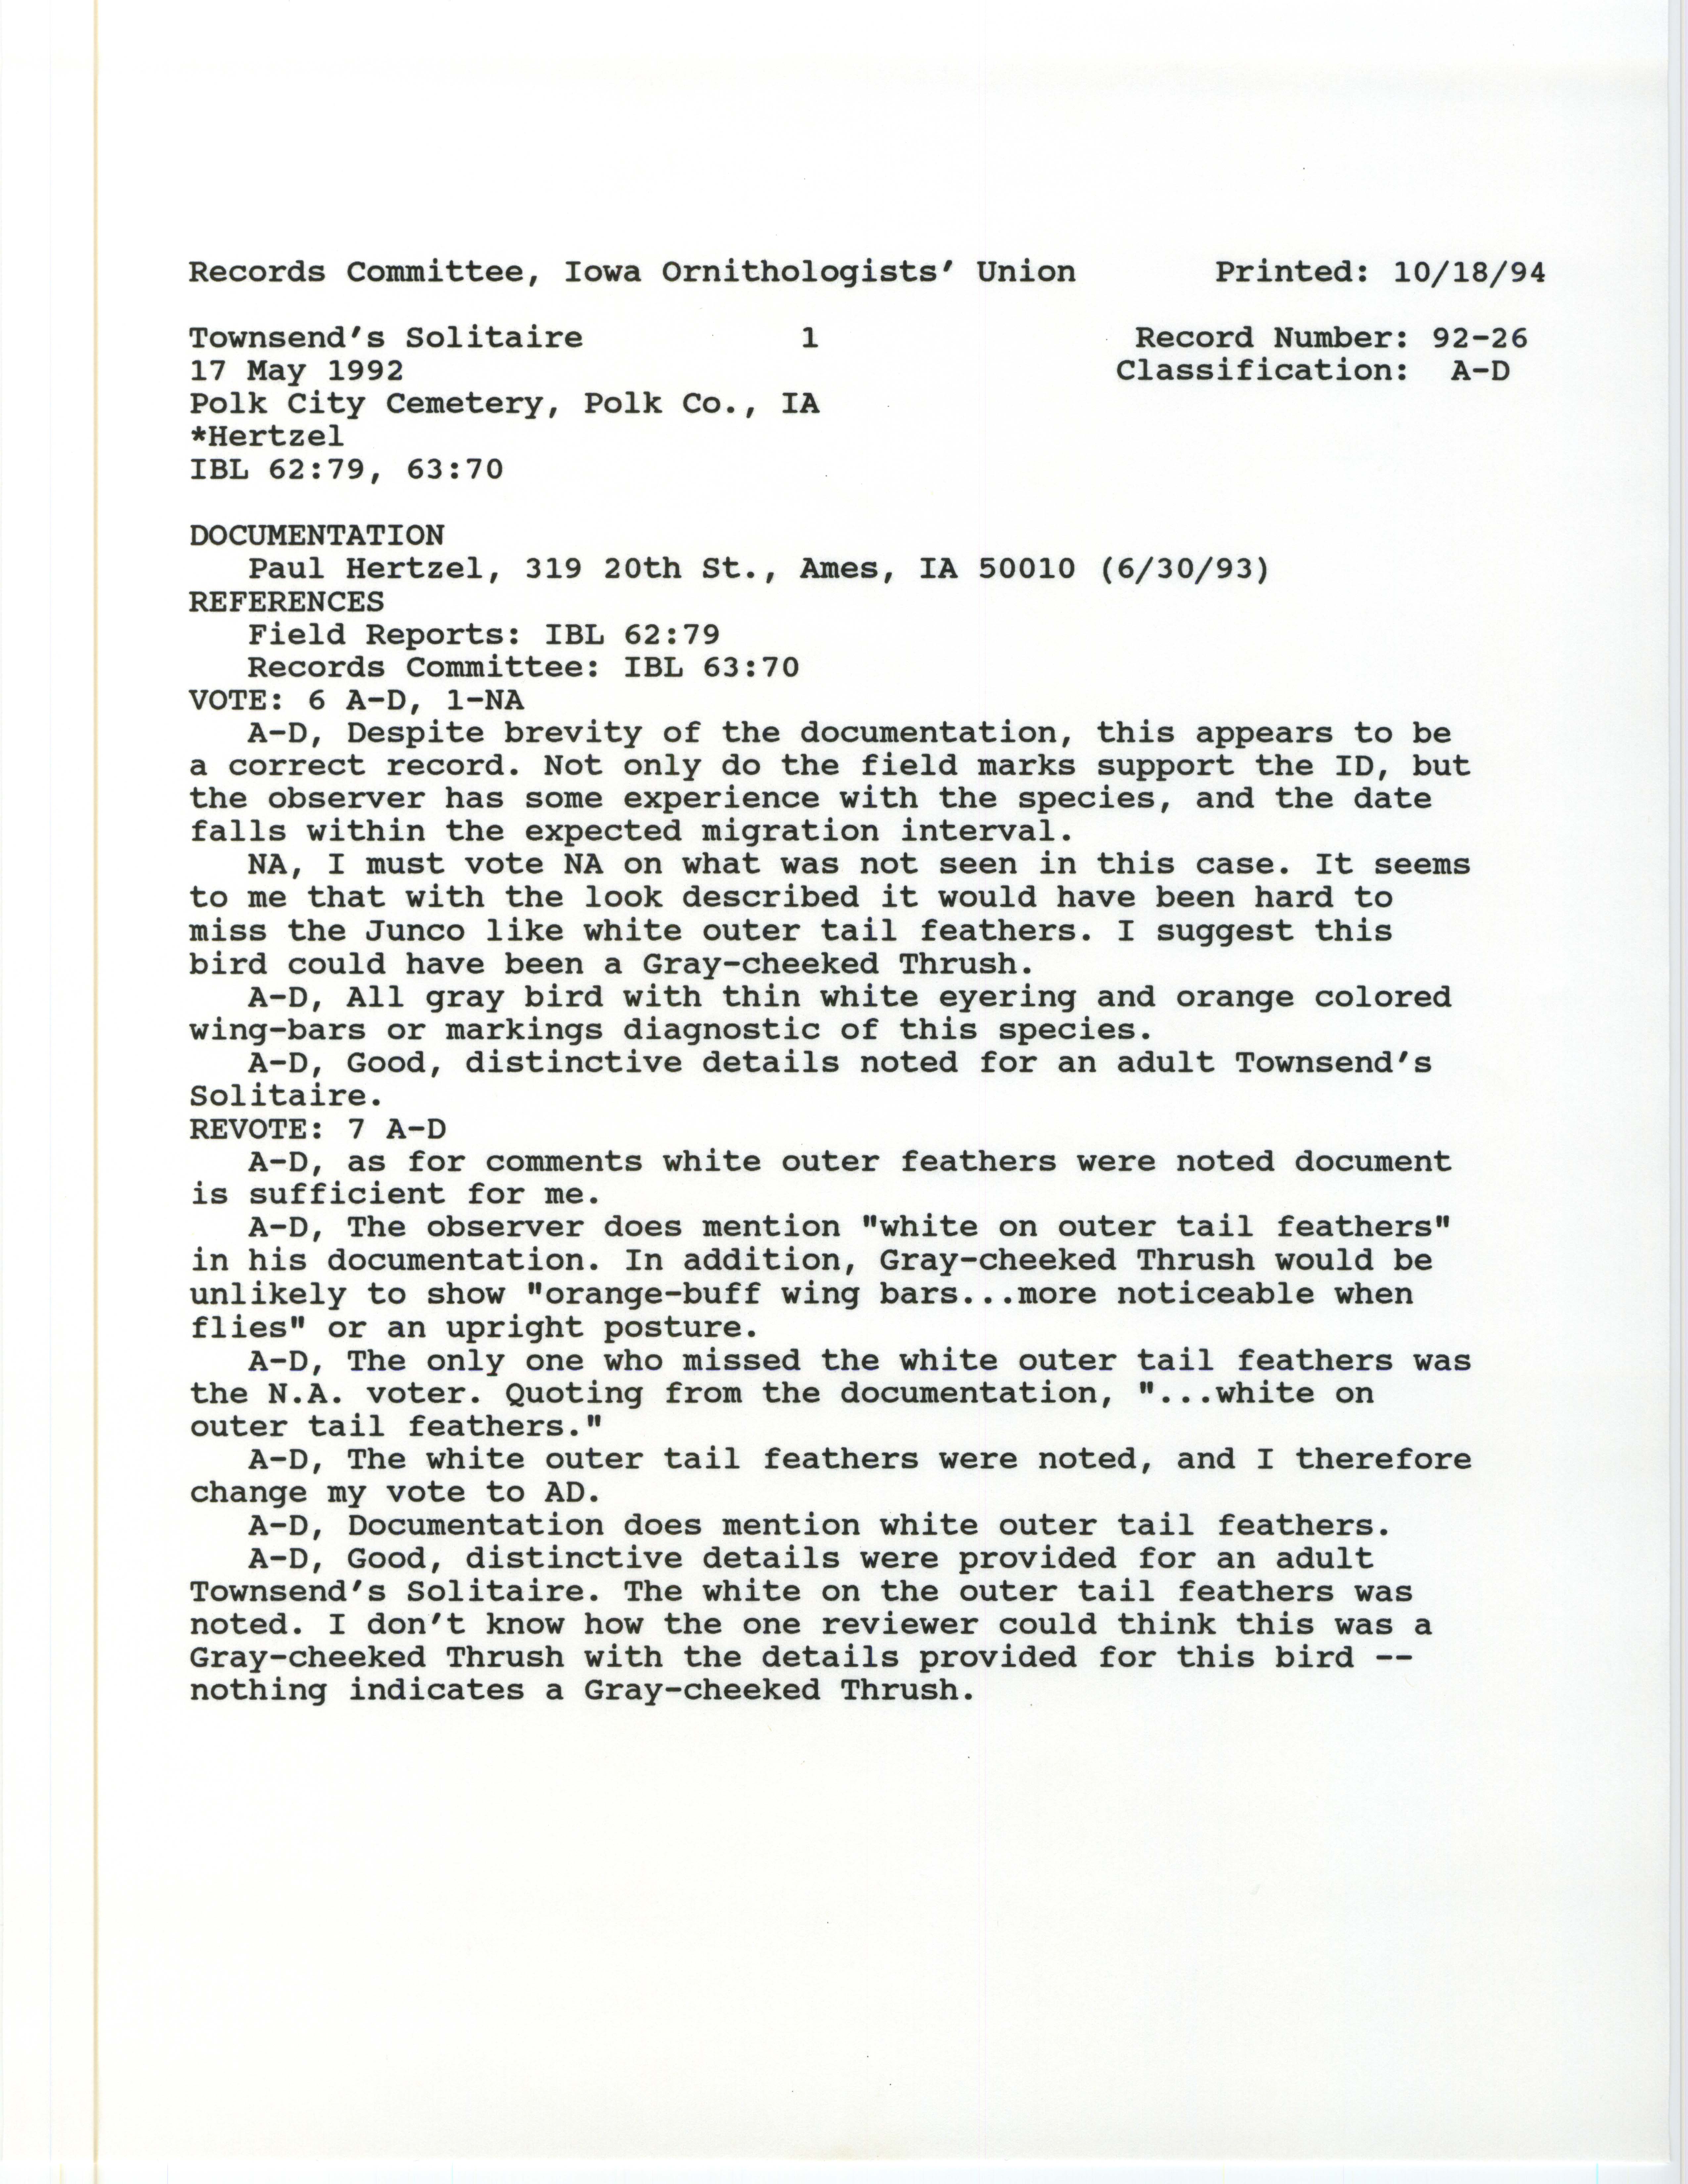 Records Committee review for rare bird sighting for Townsend's Solitaire at Polk City Cemetery, 1992